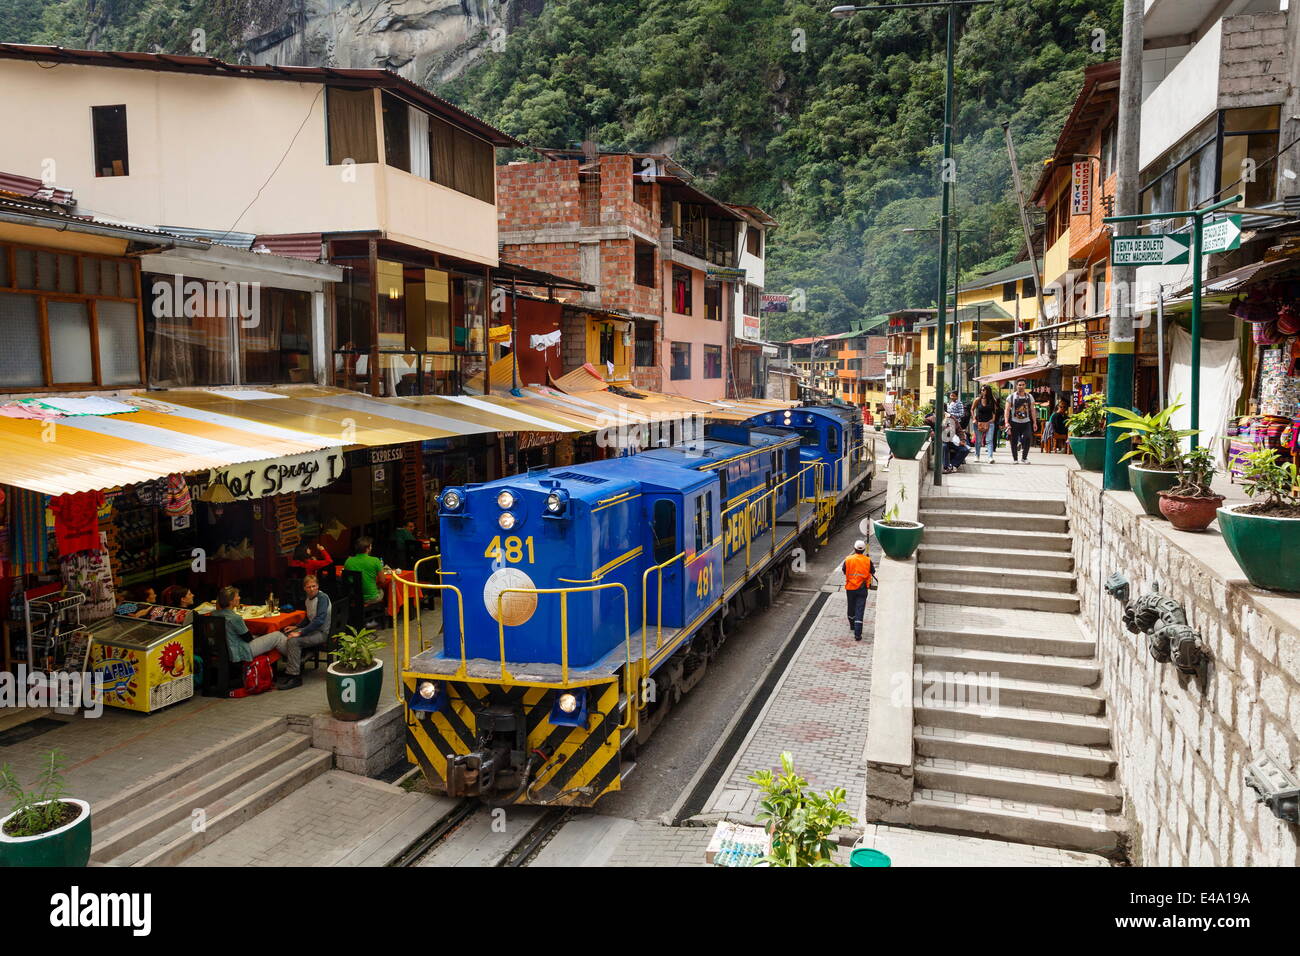 Train crossing the town of Aguas Calientes, Peru, South America Stock Photo